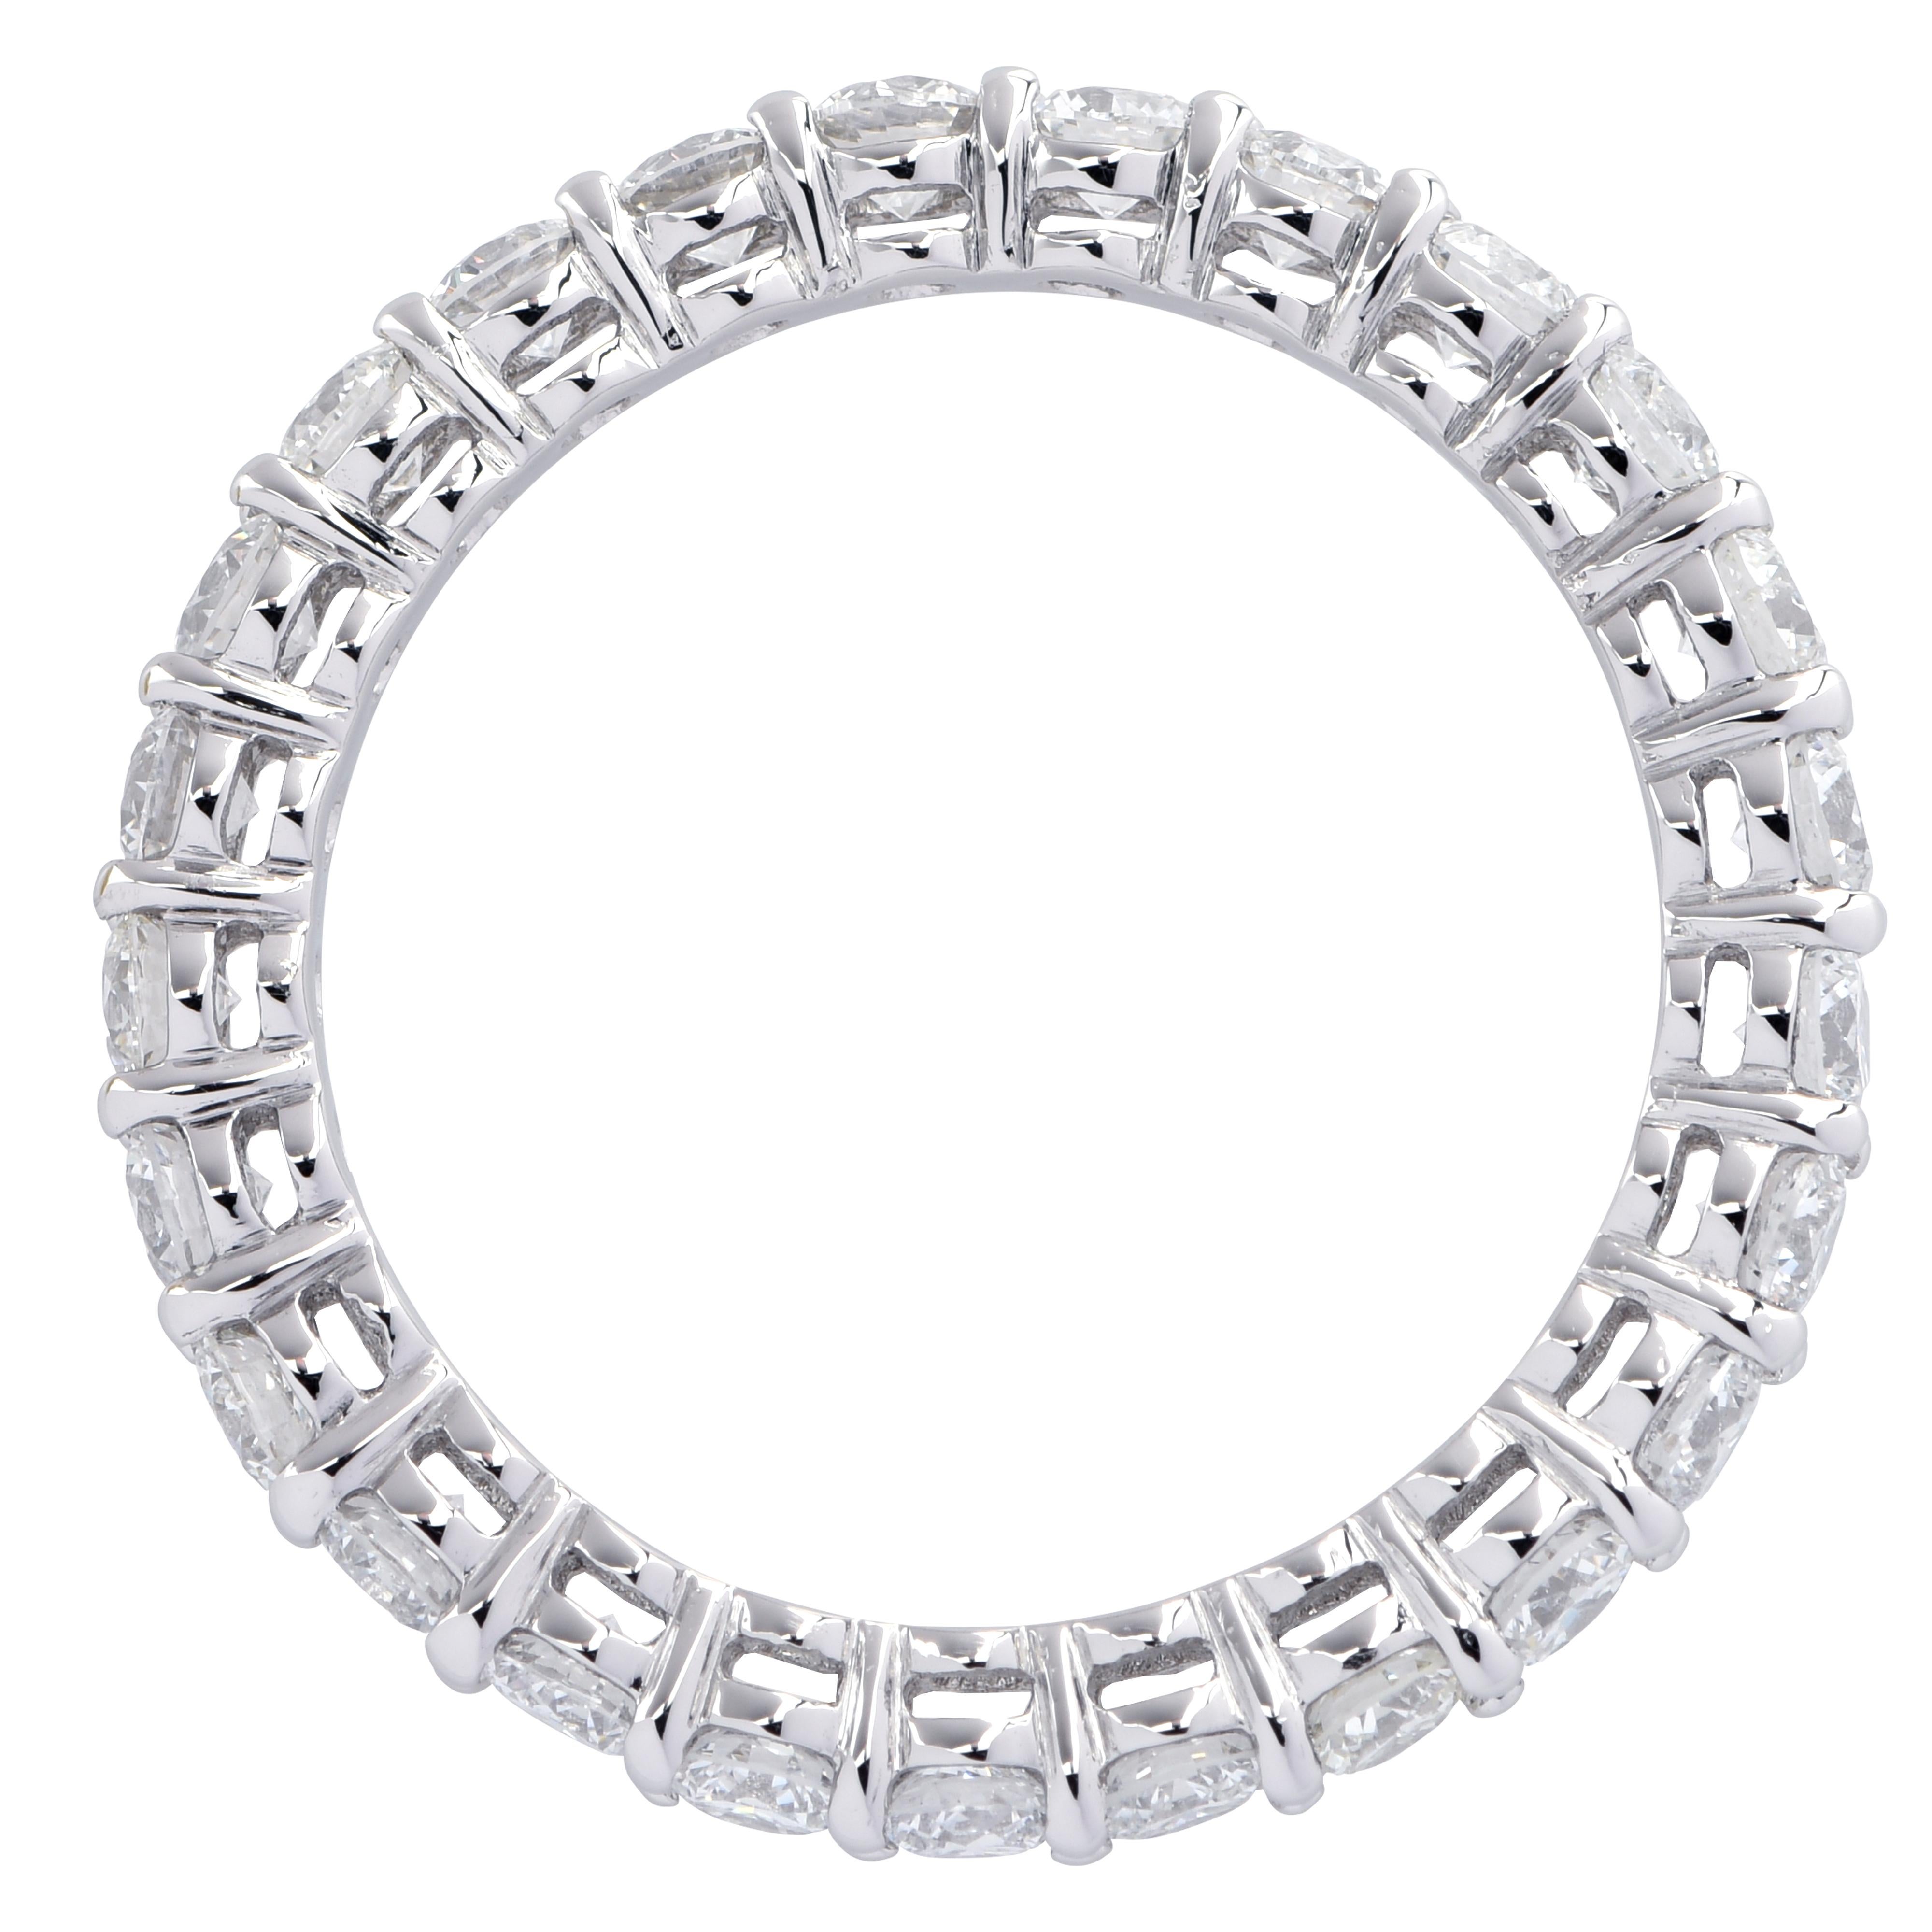 Gorgeous eternity band crafted in Platinum, showcasing 25 stunning round brilliant cut diamonds weighing 1.45 carats total, F color, VS clarity. The diamonds are set in a seamless sea of eternity, creating a spectacular symphony of brilliance and